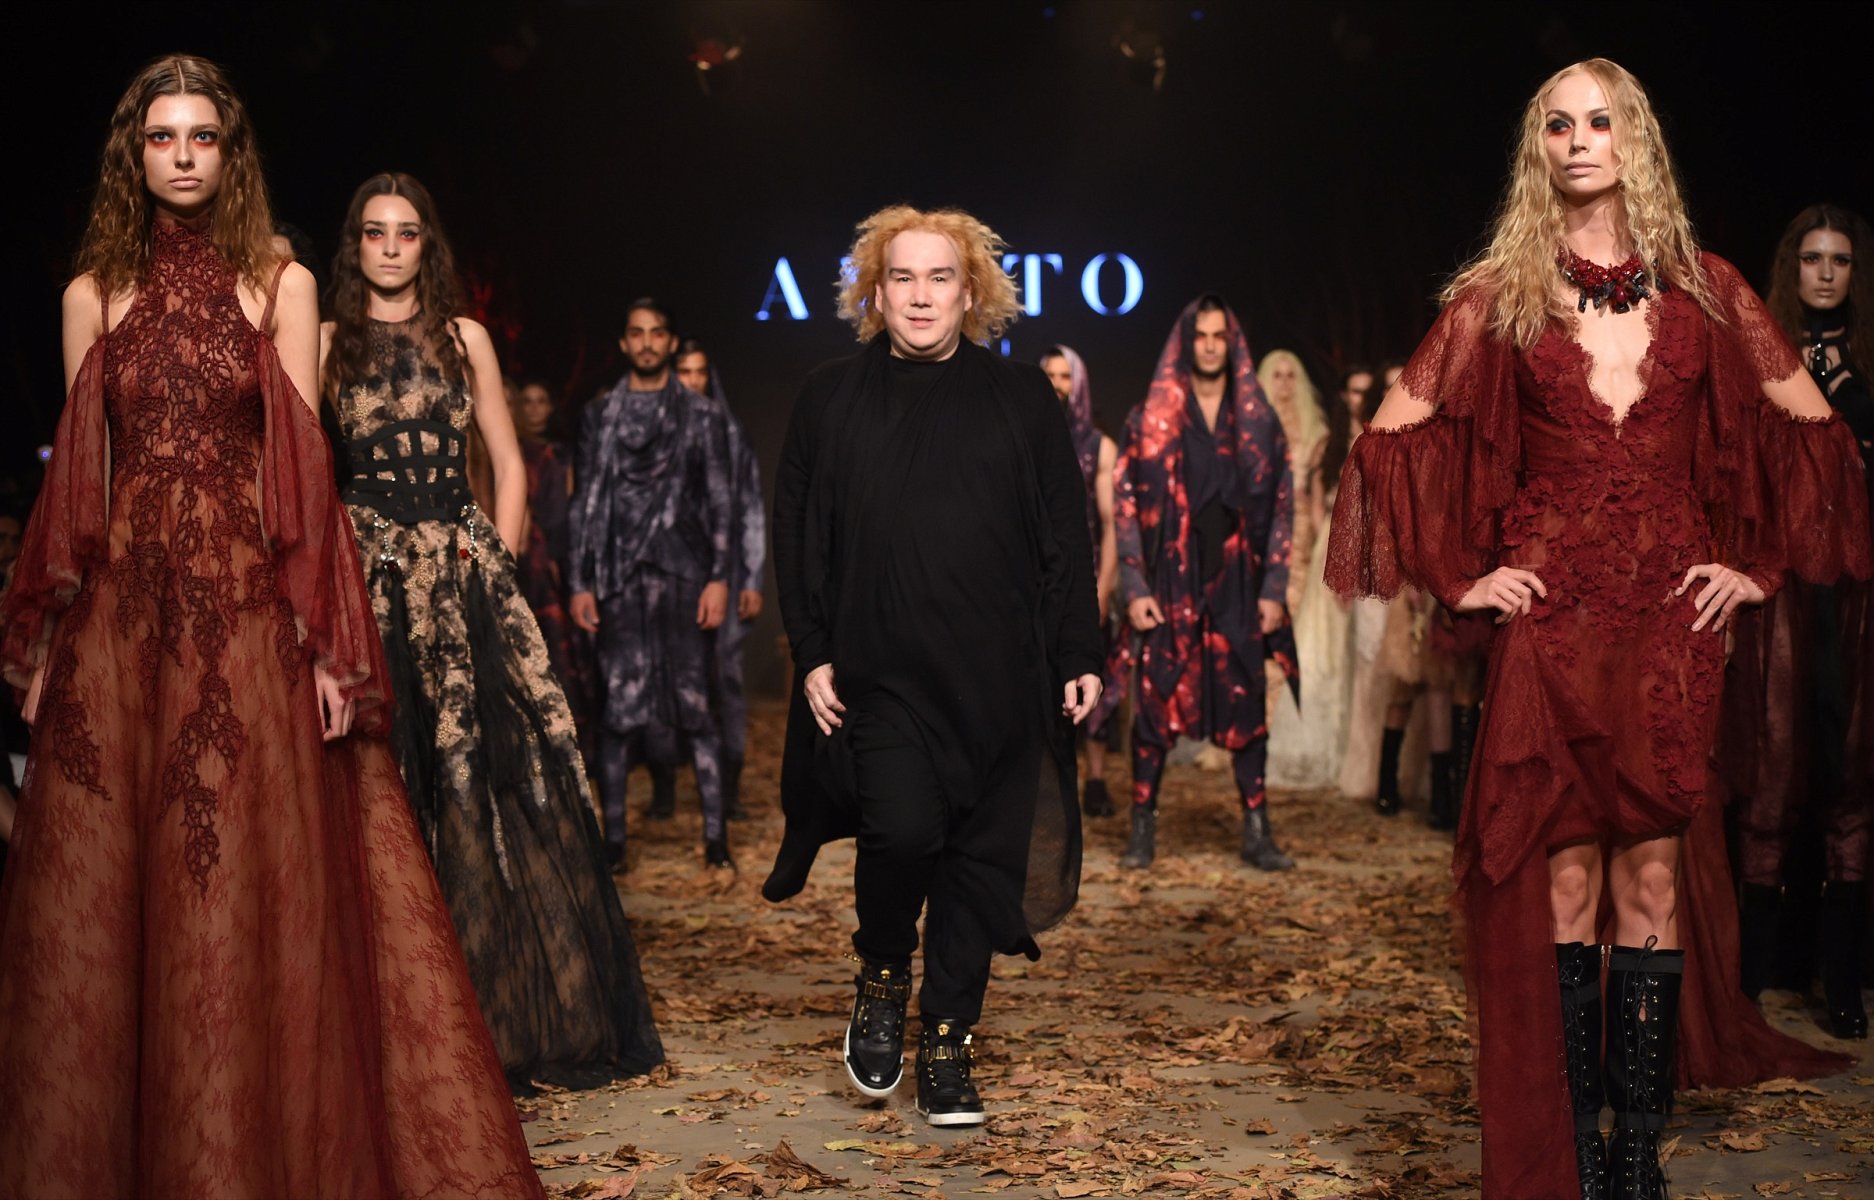 Amato by Furne One Fall-winter 2016-2017 - Ready-to-Wear - 1